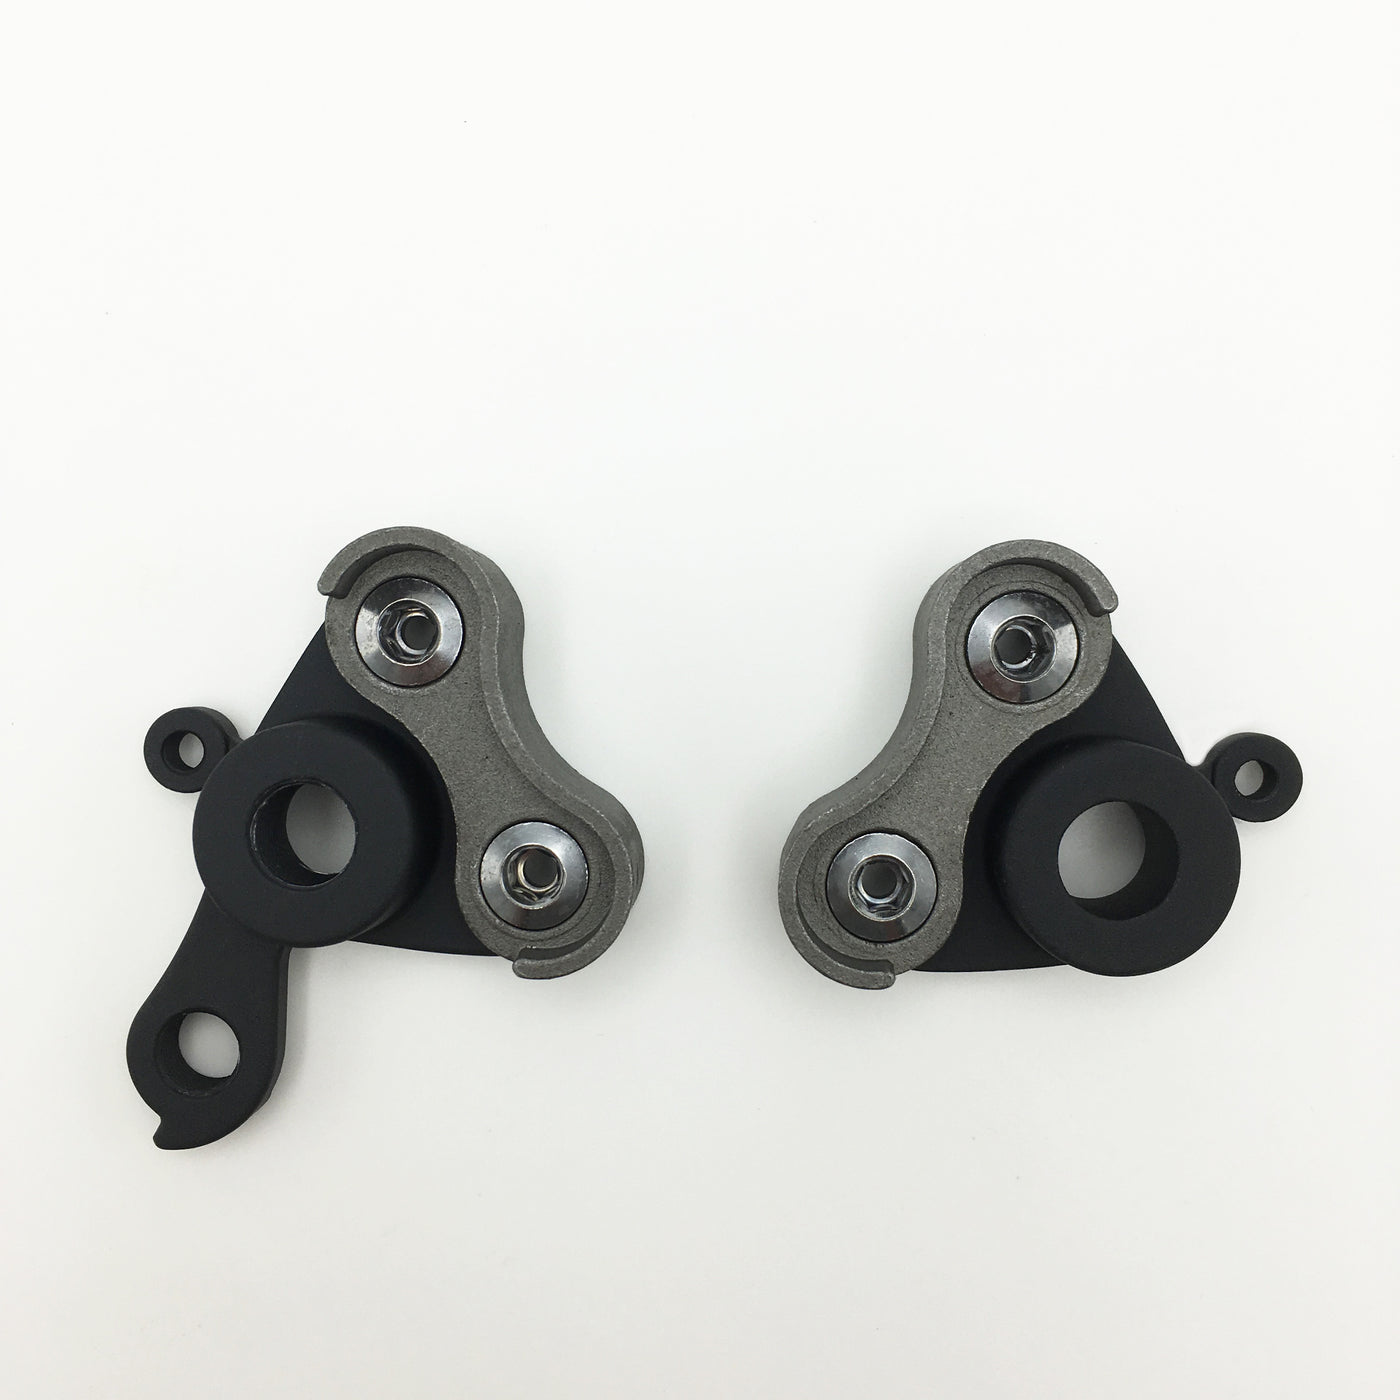 Complete thru-axle modular dropout set - with/without eyelets 142/12 - 1.5 thread pitch